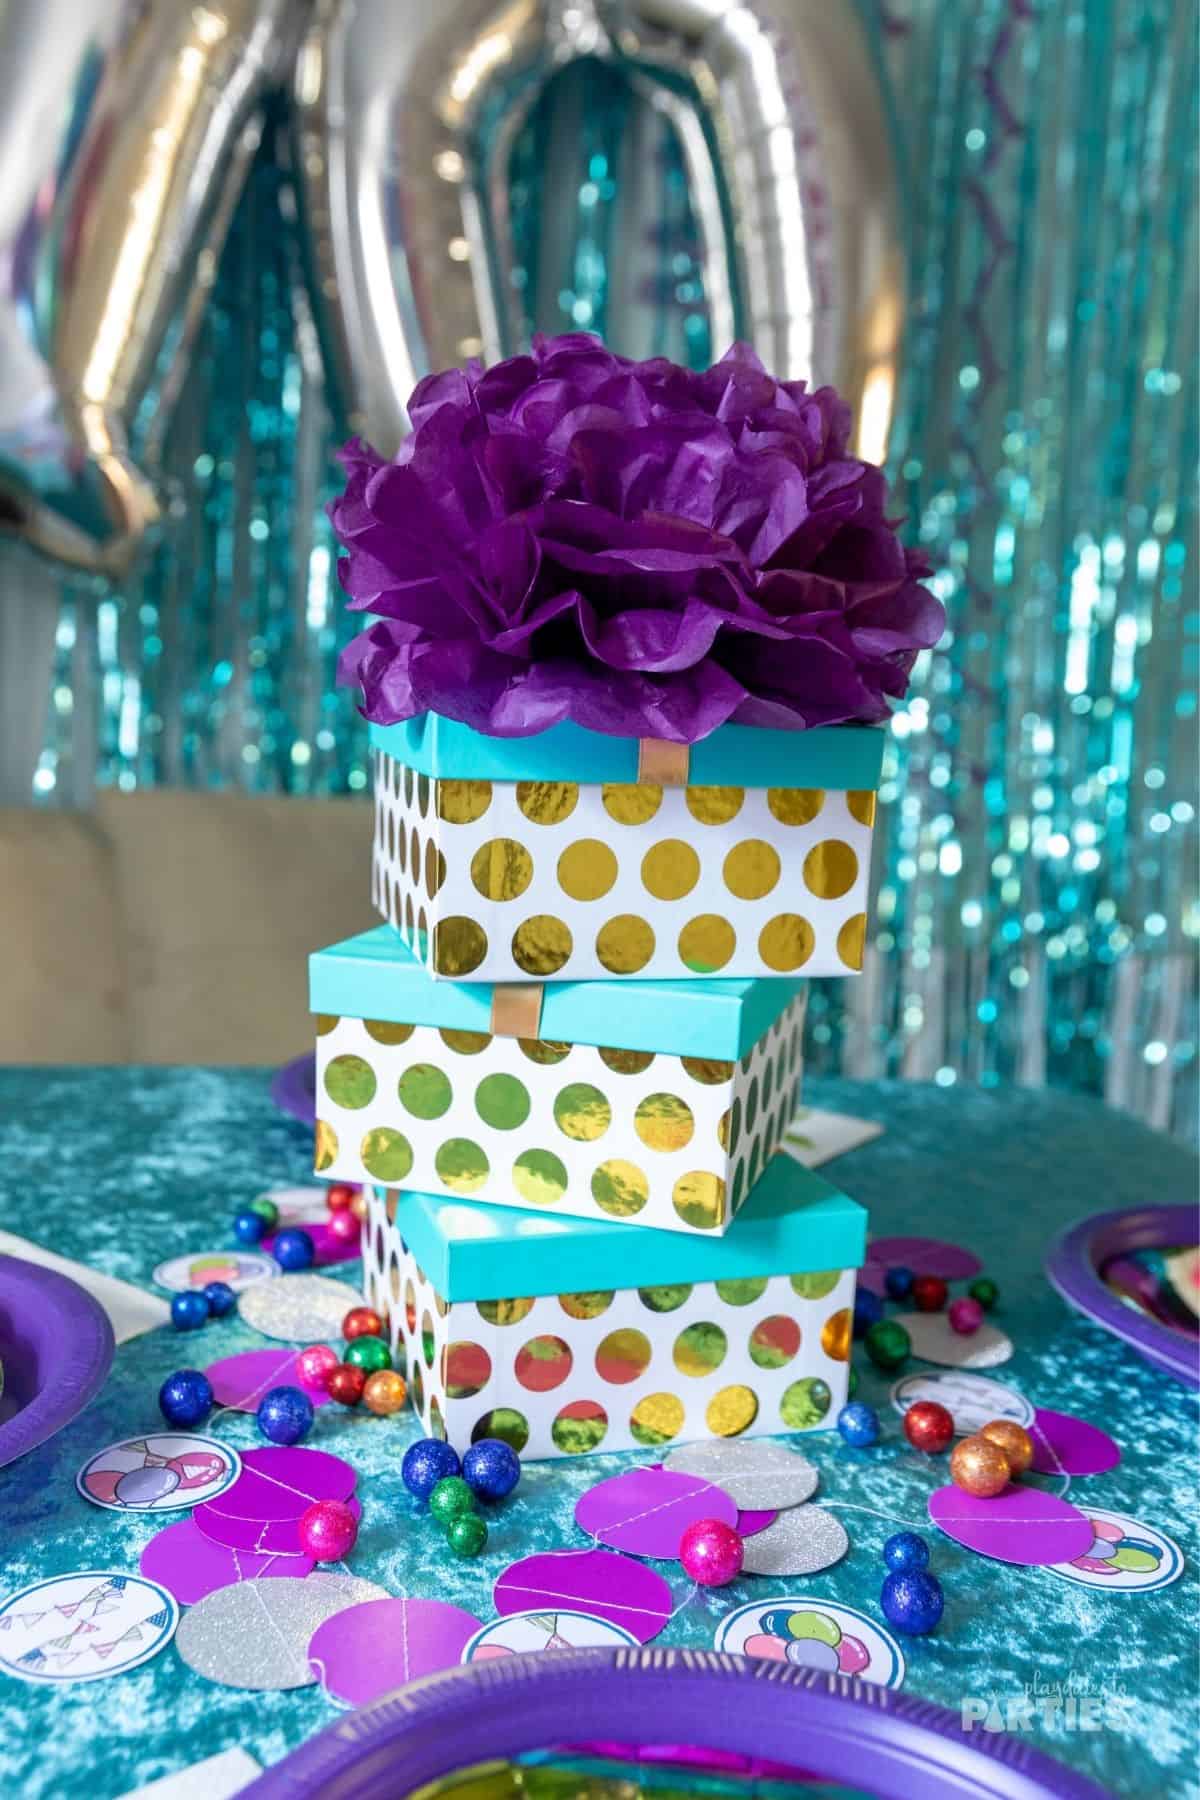 A stack of gold polka dot party favor boxes with blue lids and purple decor around them.